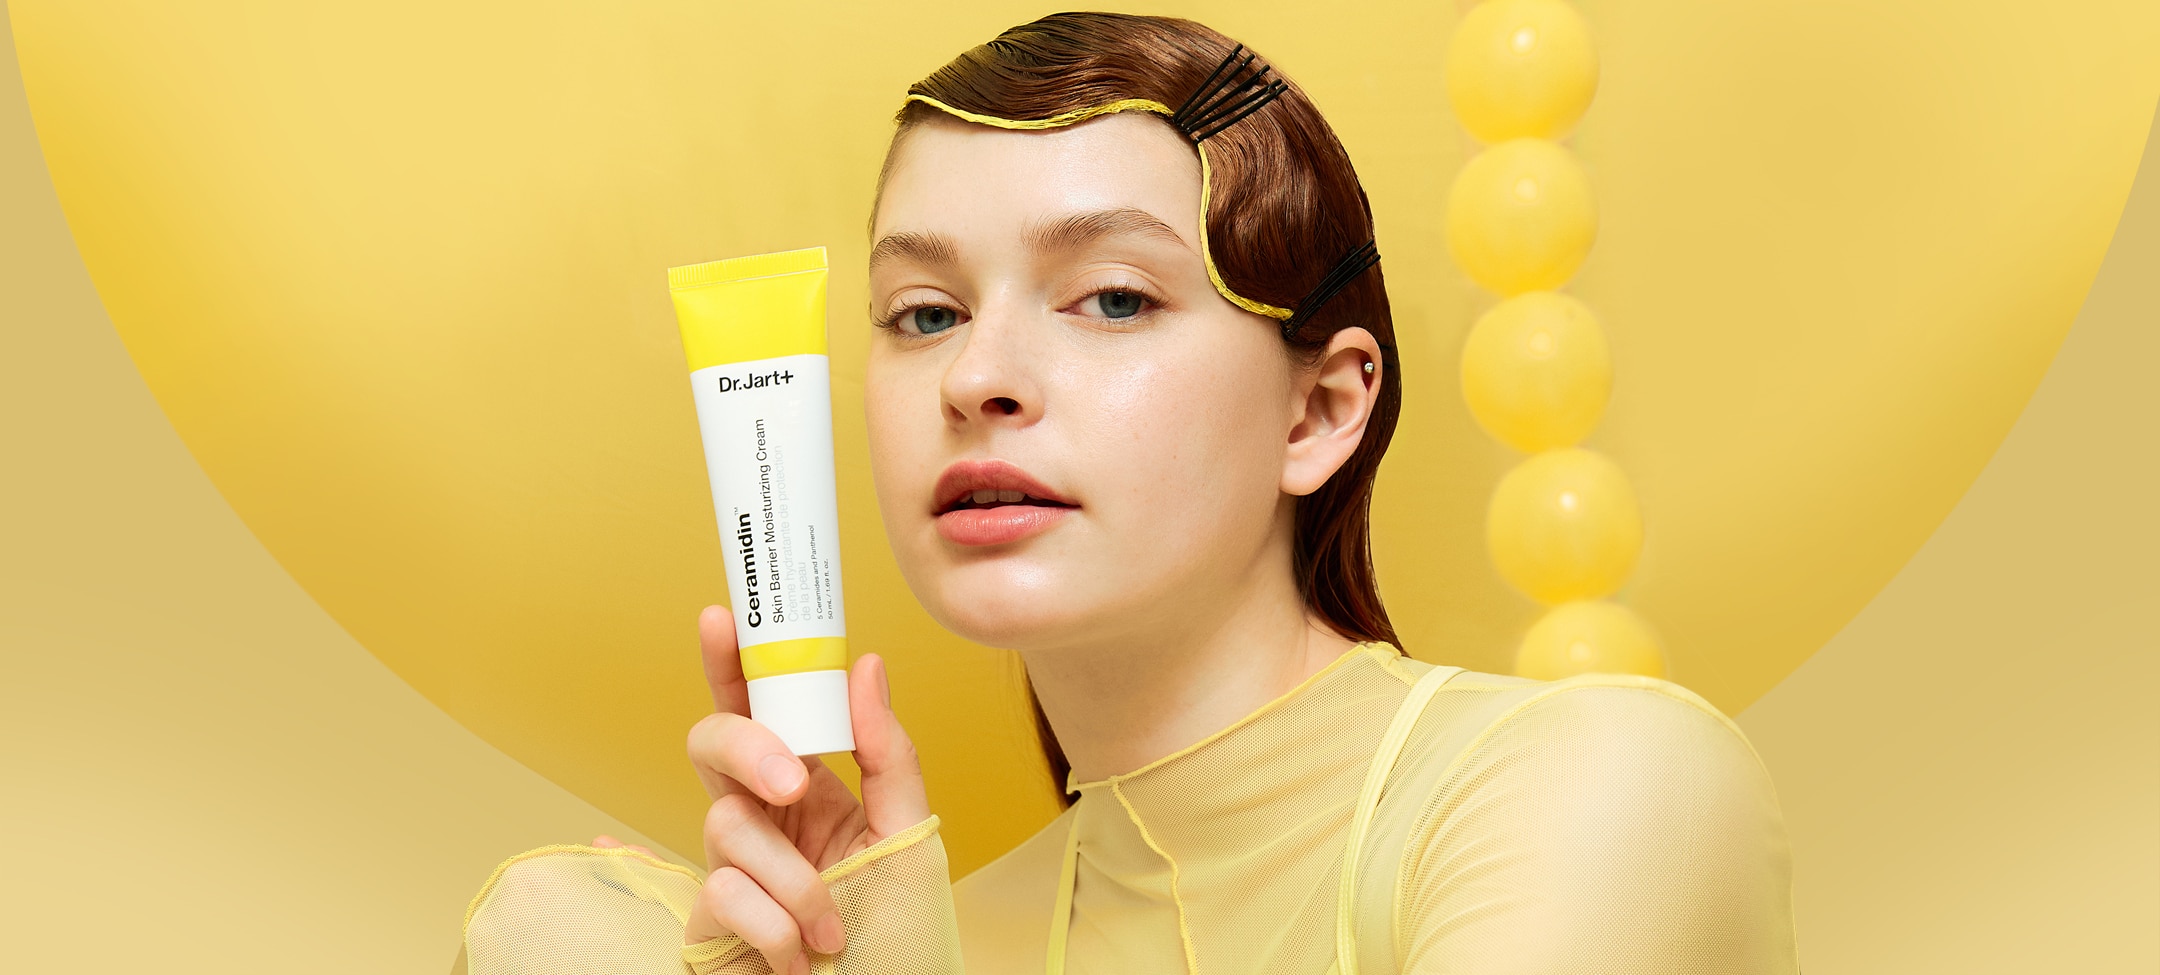 Woman holds tube of Ceramidin Moisturizer Cream in front of yellow abstract background